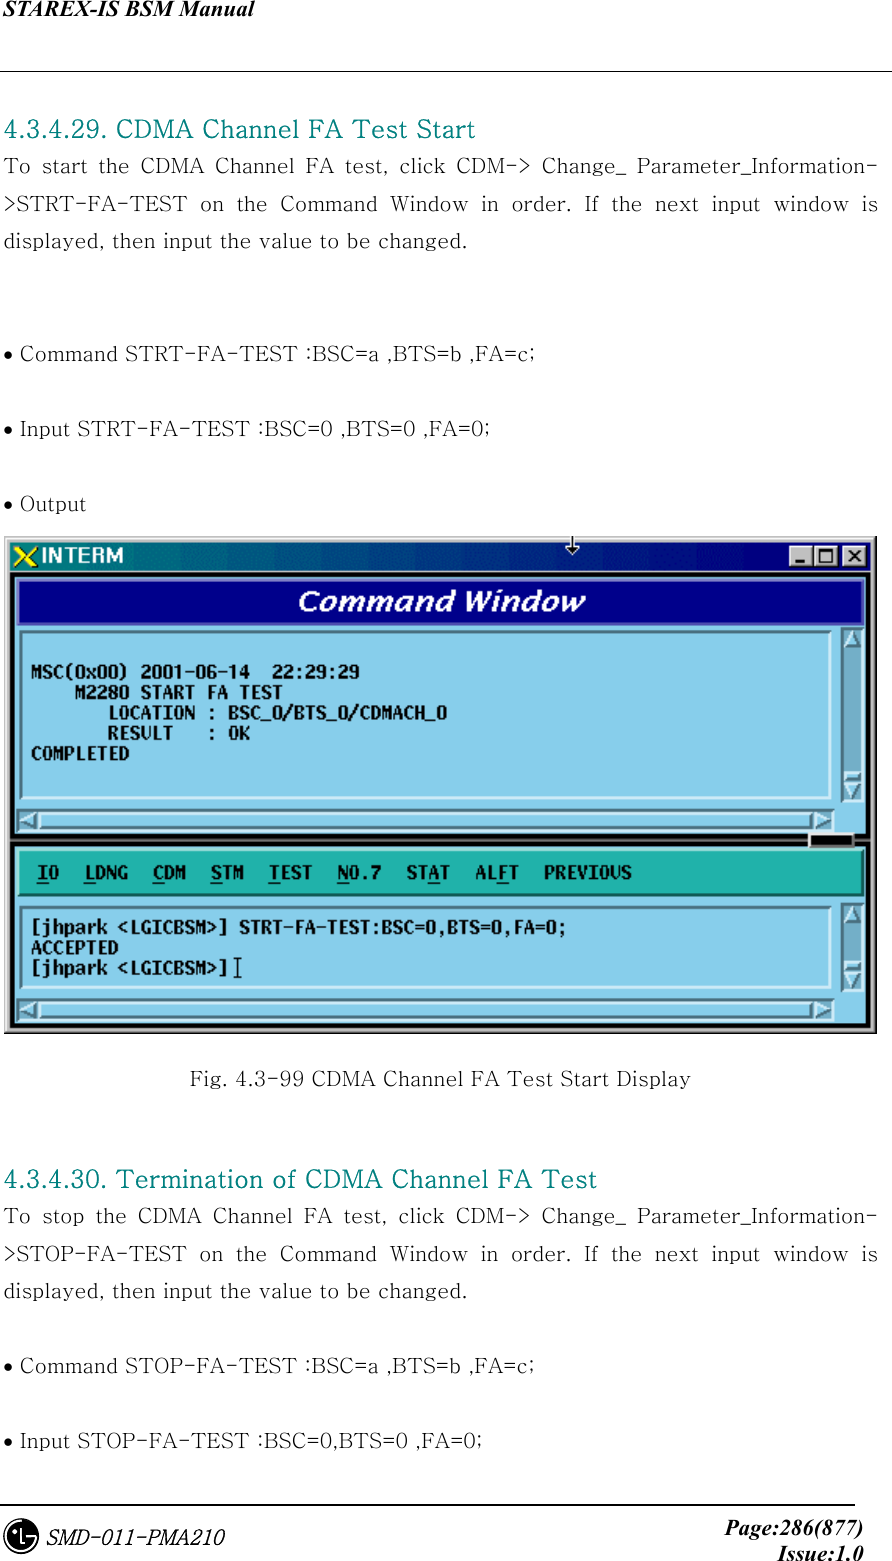 STAREX-IS BSM Manual     Page:286(877)Issue:1.0SMD-011-PMA210  4.3.4.29. CDMA Channel FA Test Start To start the CDMA Channel FA test, click CDM-&gt; Change_ Parameter_Information-&gt;STRT-FA-TEST  on  the  Command  Window  in  order.  If  the  next  input  window  is displayed, then input the value to be changed.     • Command STRT-FA-TEST :BSC=a ,BTS=b ,FA=c;  • Input STRT-FA-TEST :BSC=0 ,BTS=0 ,FA=0;  • Output  Fig. 4.3-99 CDMA Channel FA Test Start Display  4.3.4.30. Termination of CDMA Channel FA Test   To  stop  the  CDMA  Channel  FA  test,  click  CDM-&gt;  Change_  Parameter_Information-&gt;STOP-FA-TEST  on  the  Command  Window  in  order.  If  the  next  input  window  is displayed, then input the value to be changed.    • Command STOP-FA-TEST :BSC=a ,BTS=b ,FA=c;  • Input STOP-FA-TEST :BSC=0,BTS=0 ,FA=0; 